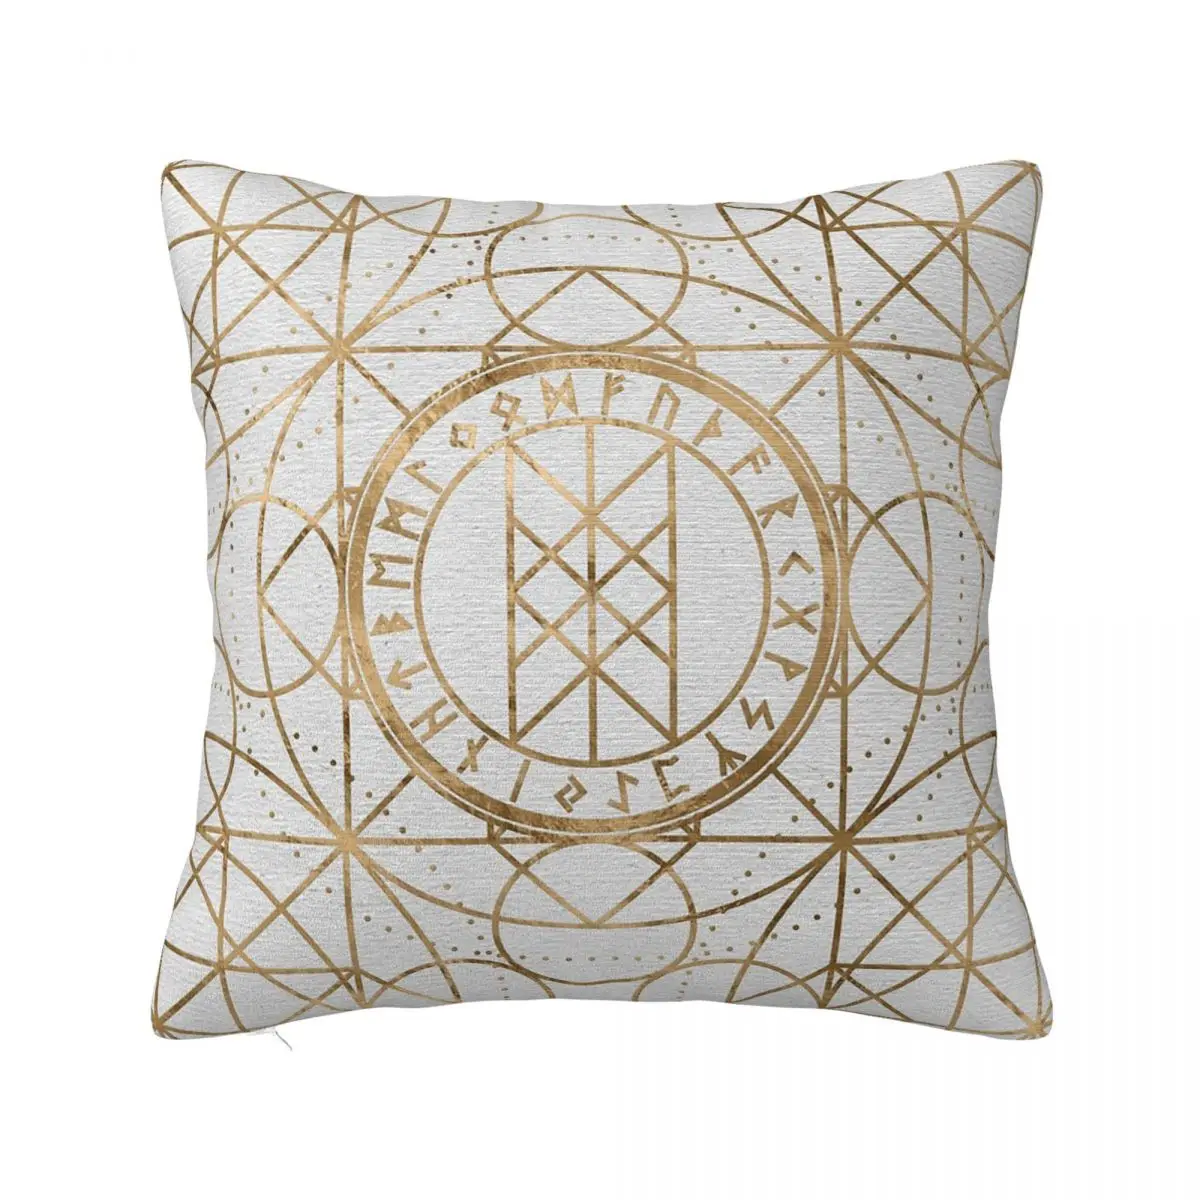 Web Of Wyrd The Matrix Of Fate - Pastel Gold vikings runes  Decorations Throw Pillow Case Cover for Home Double-sided Printing